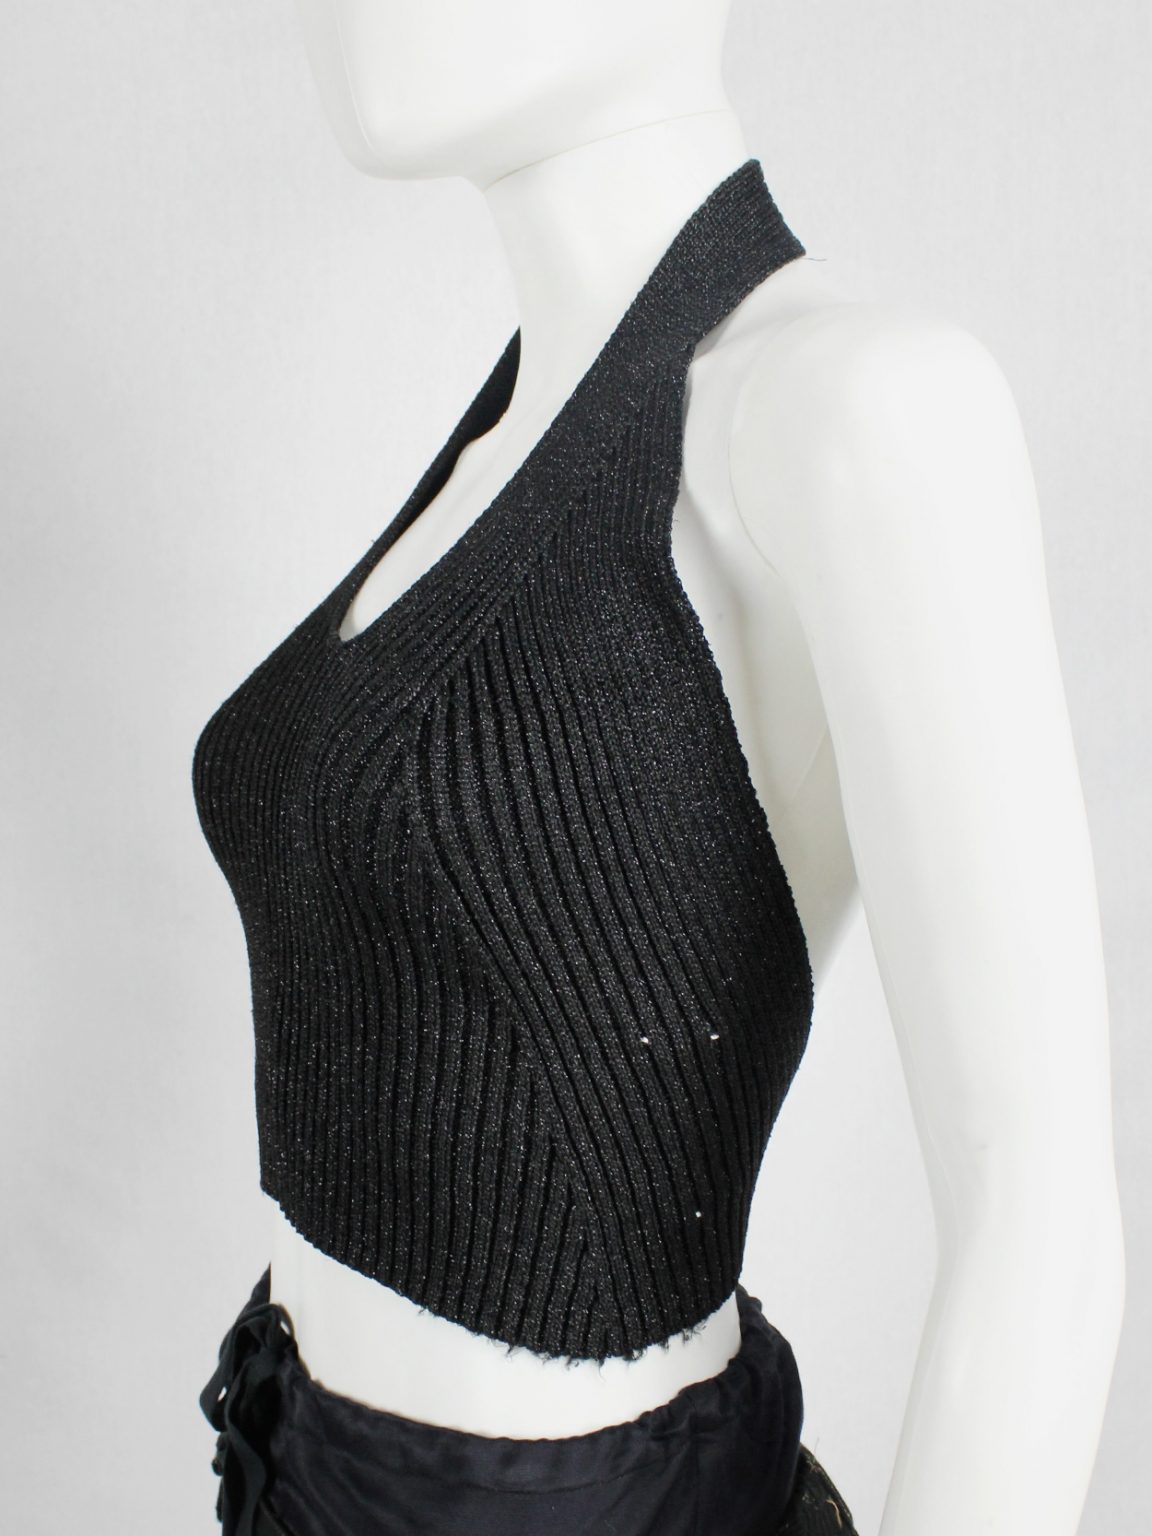 Maison Martin Margiela black crop top with open back — fall 1999